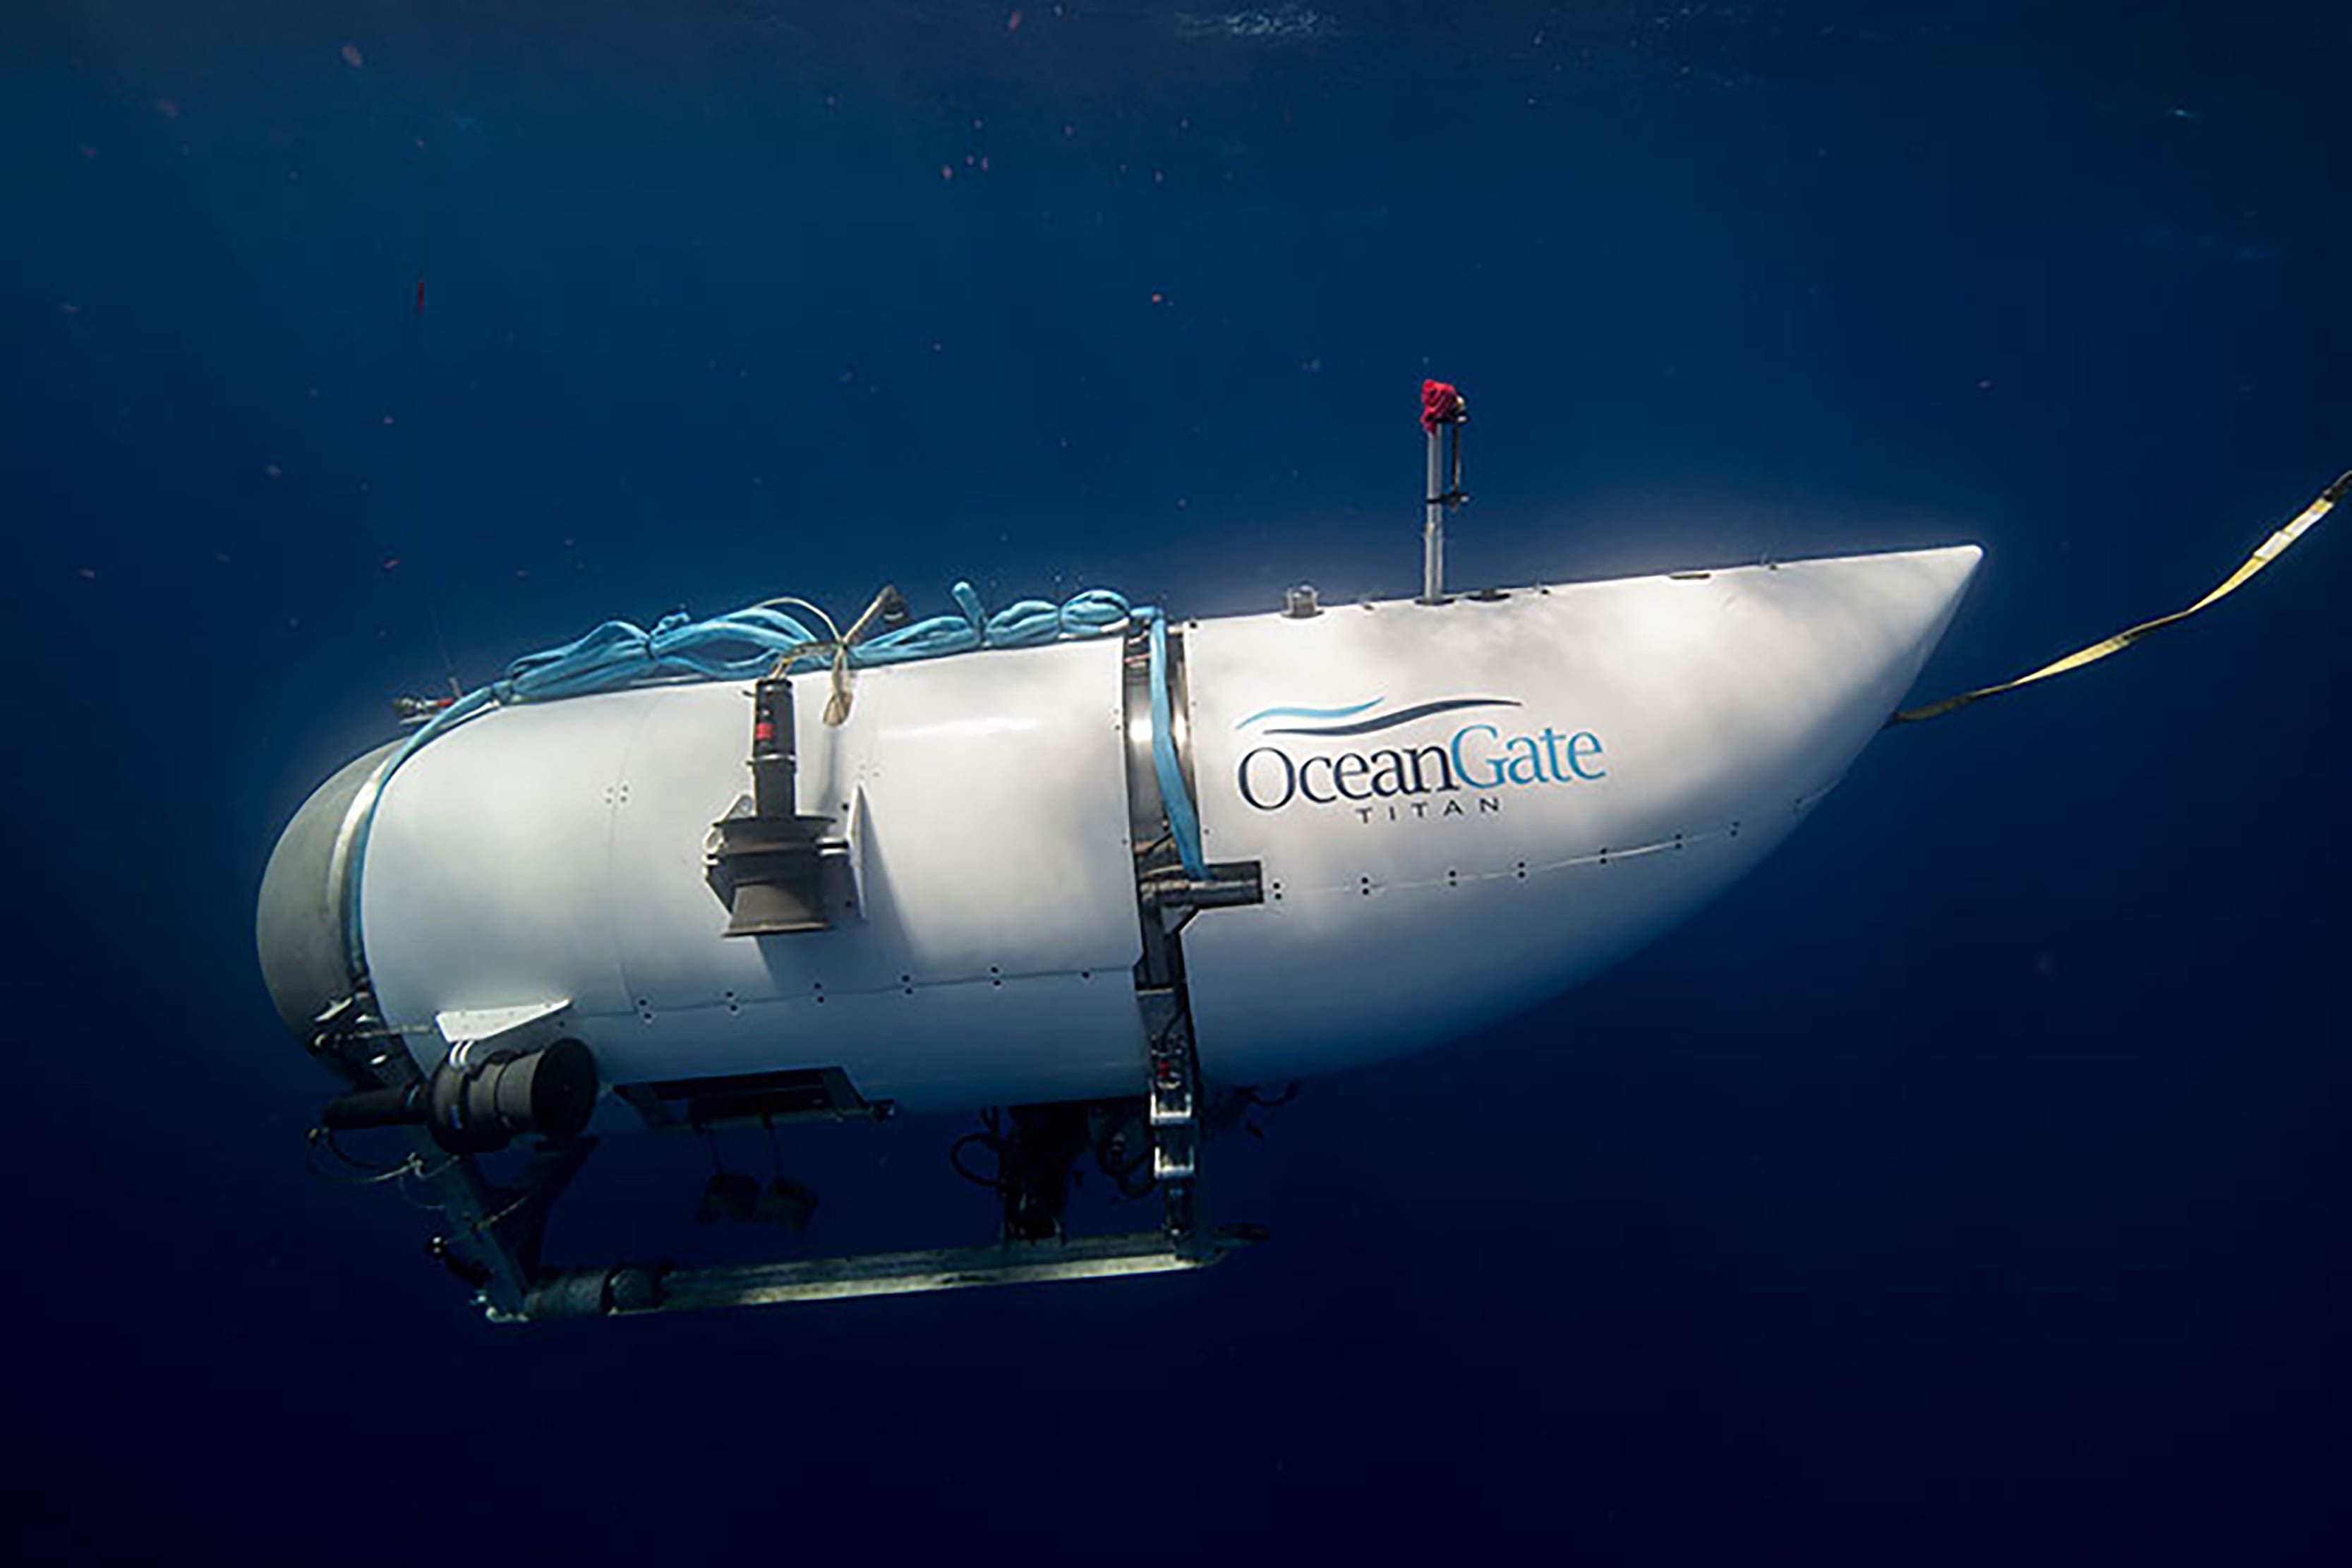 The submersible vessel named Titan, which is used to visit the wreckage site of the Titanic (OceanGate Expeditions)